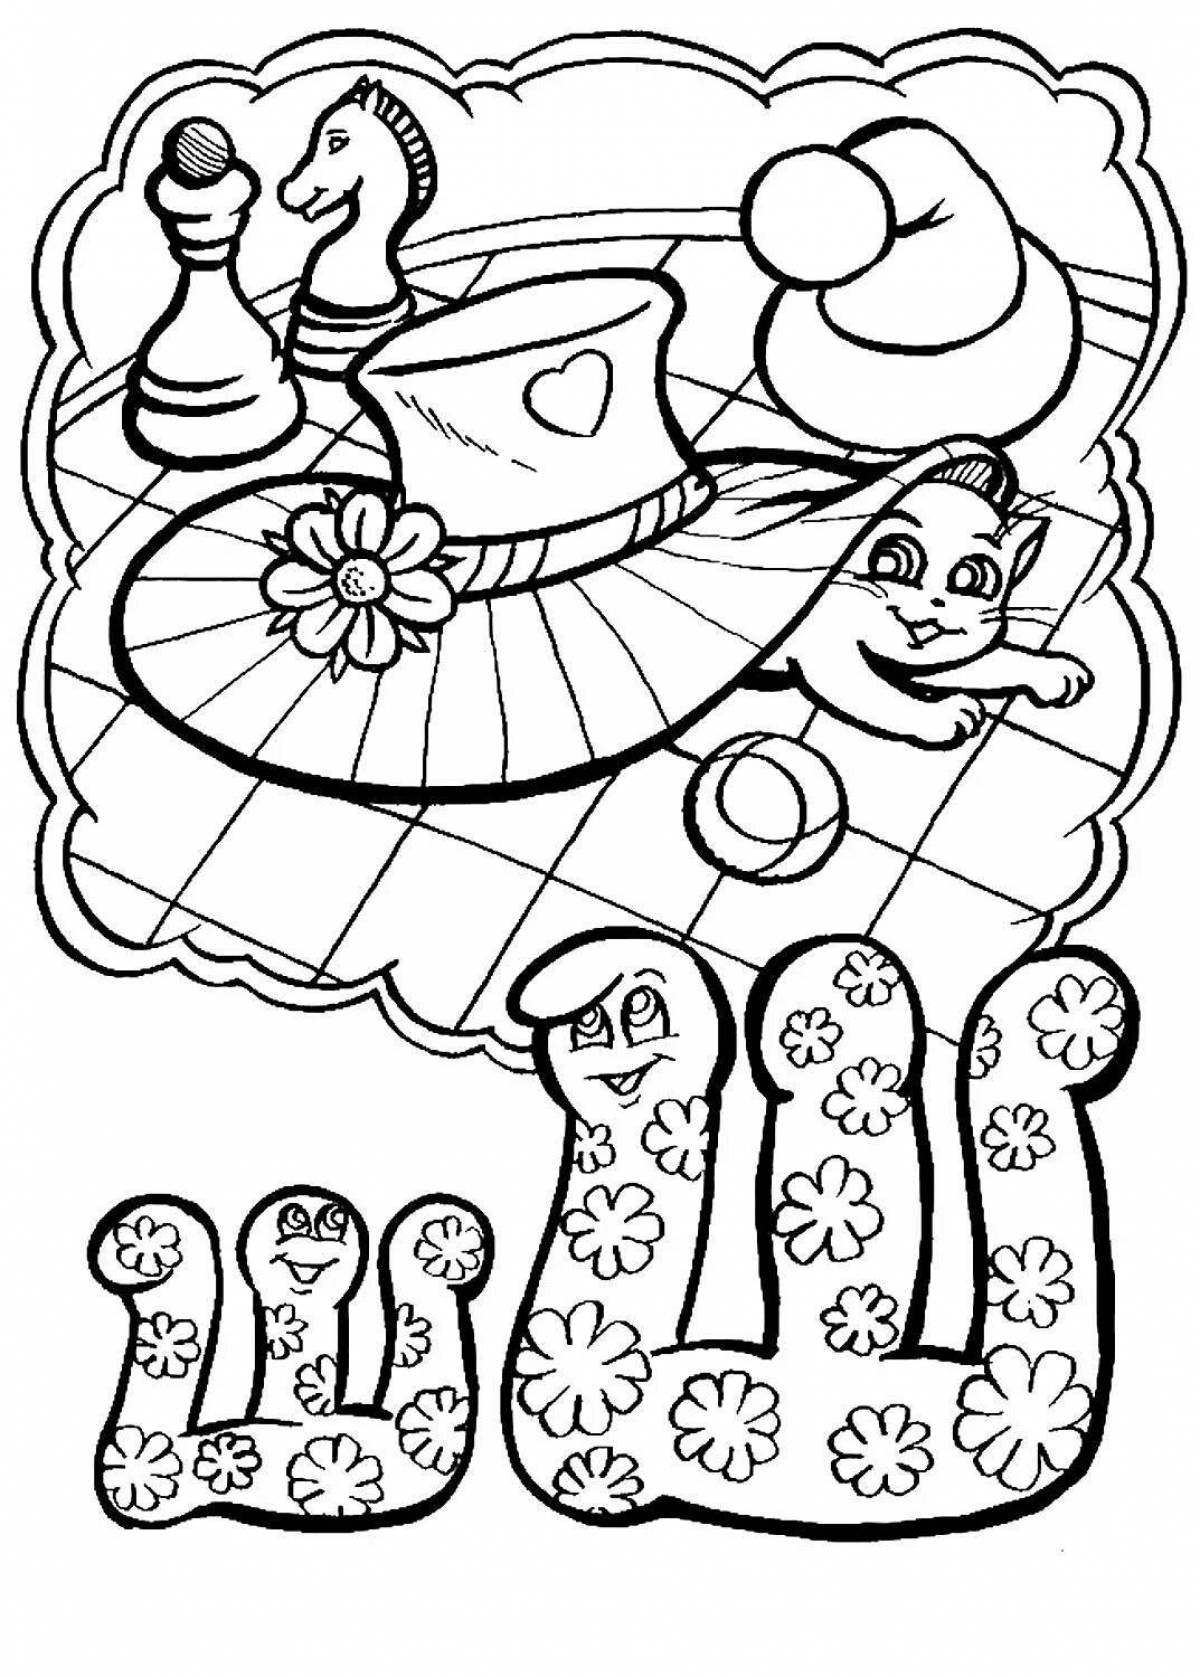 Creative letter w coloring book for preschoolers